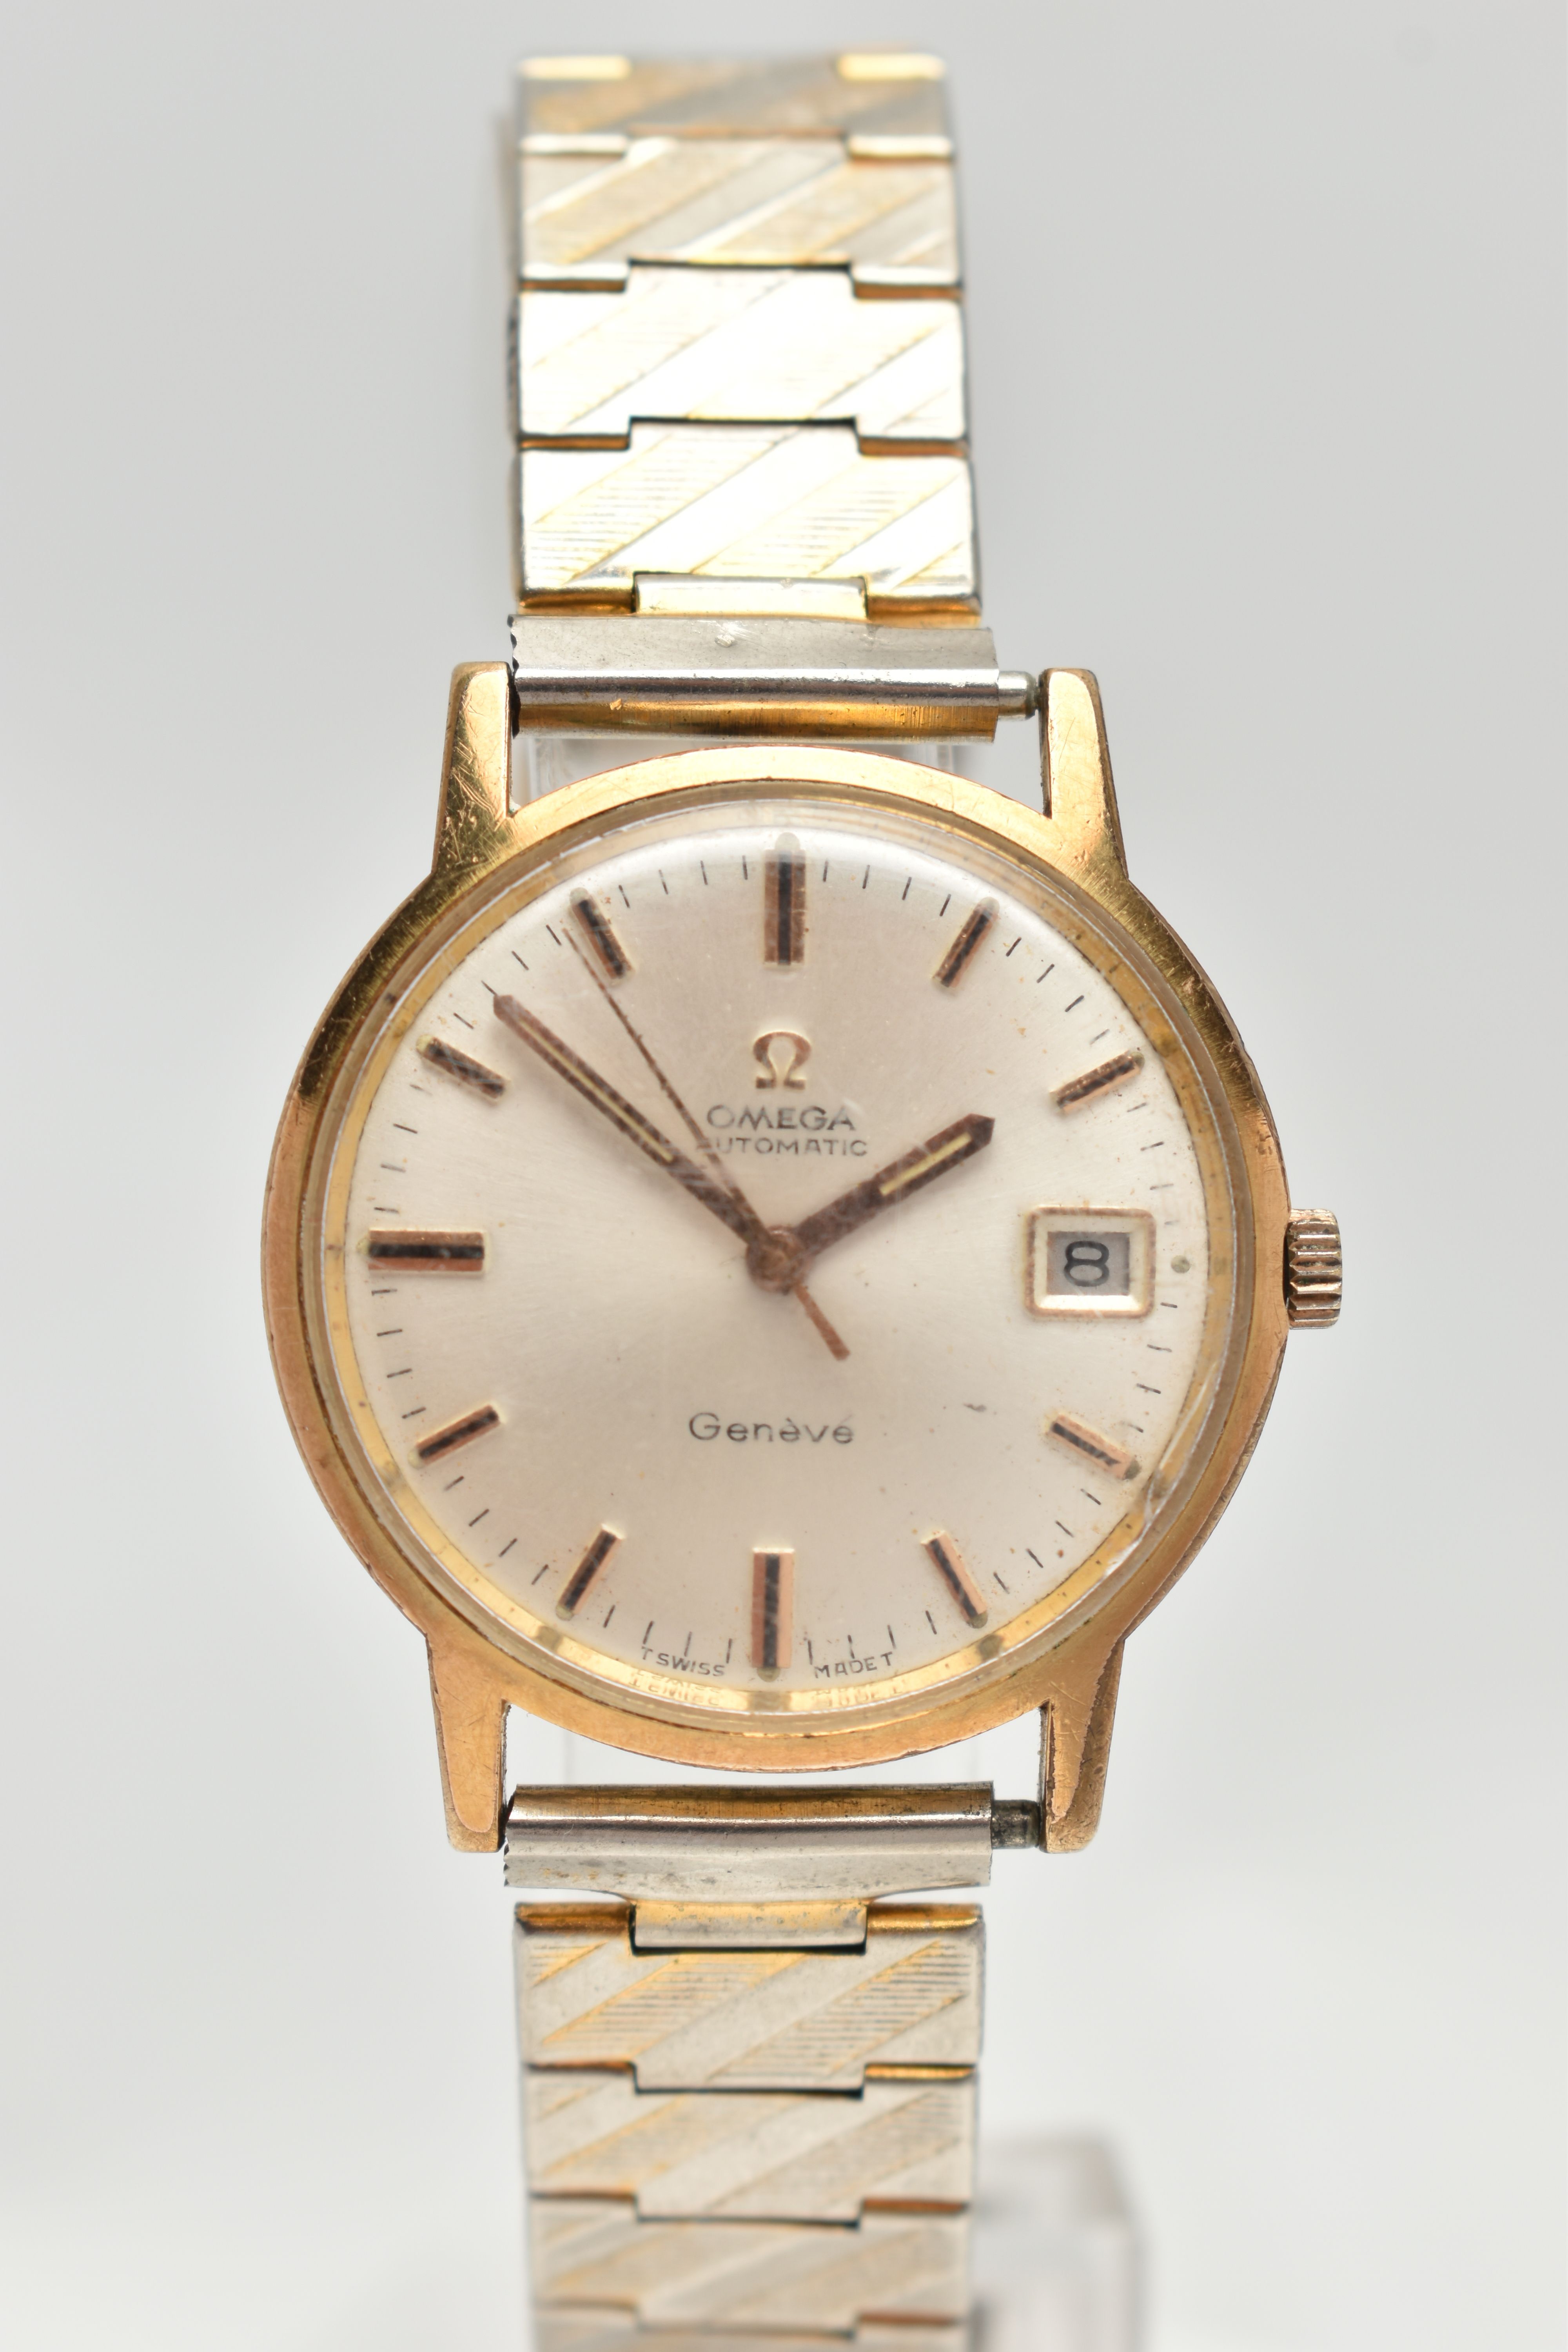 AN ‘OMEGA’ WRISTWATCH, automatic movement, round dial signed ‘Omega’ automatic Geneve, baton